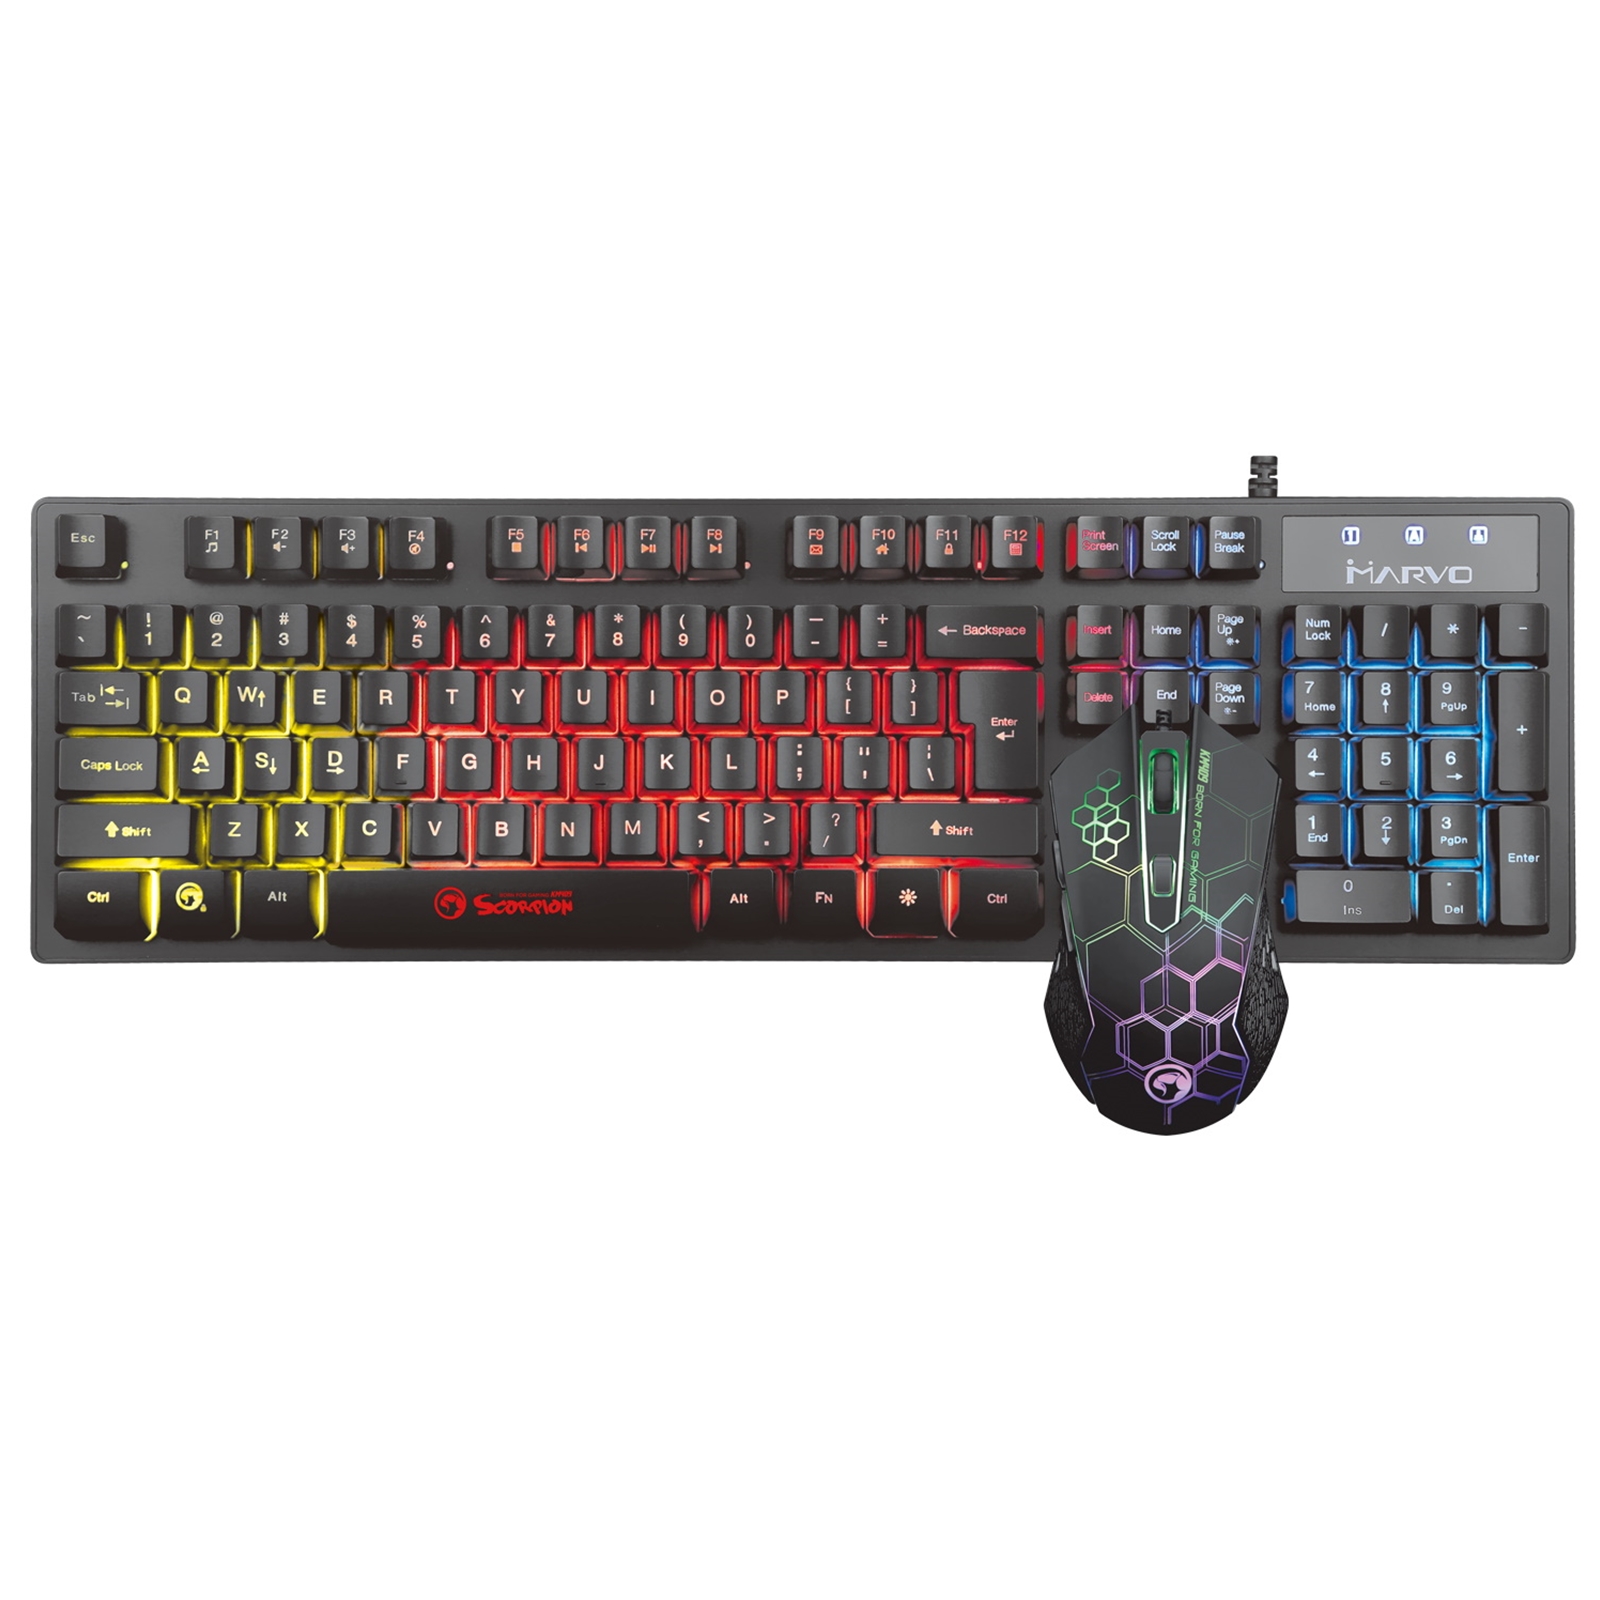 Marvo Scorpion KM409 Gaming Keyboard and Mouse Bundle, 7 Colour LED Backlit, USB 2.0, Compact Design, with Multi-Media and Anti-ghosting Keys, Optical Sensor Mouse with Adjustable 800-2400 dpi